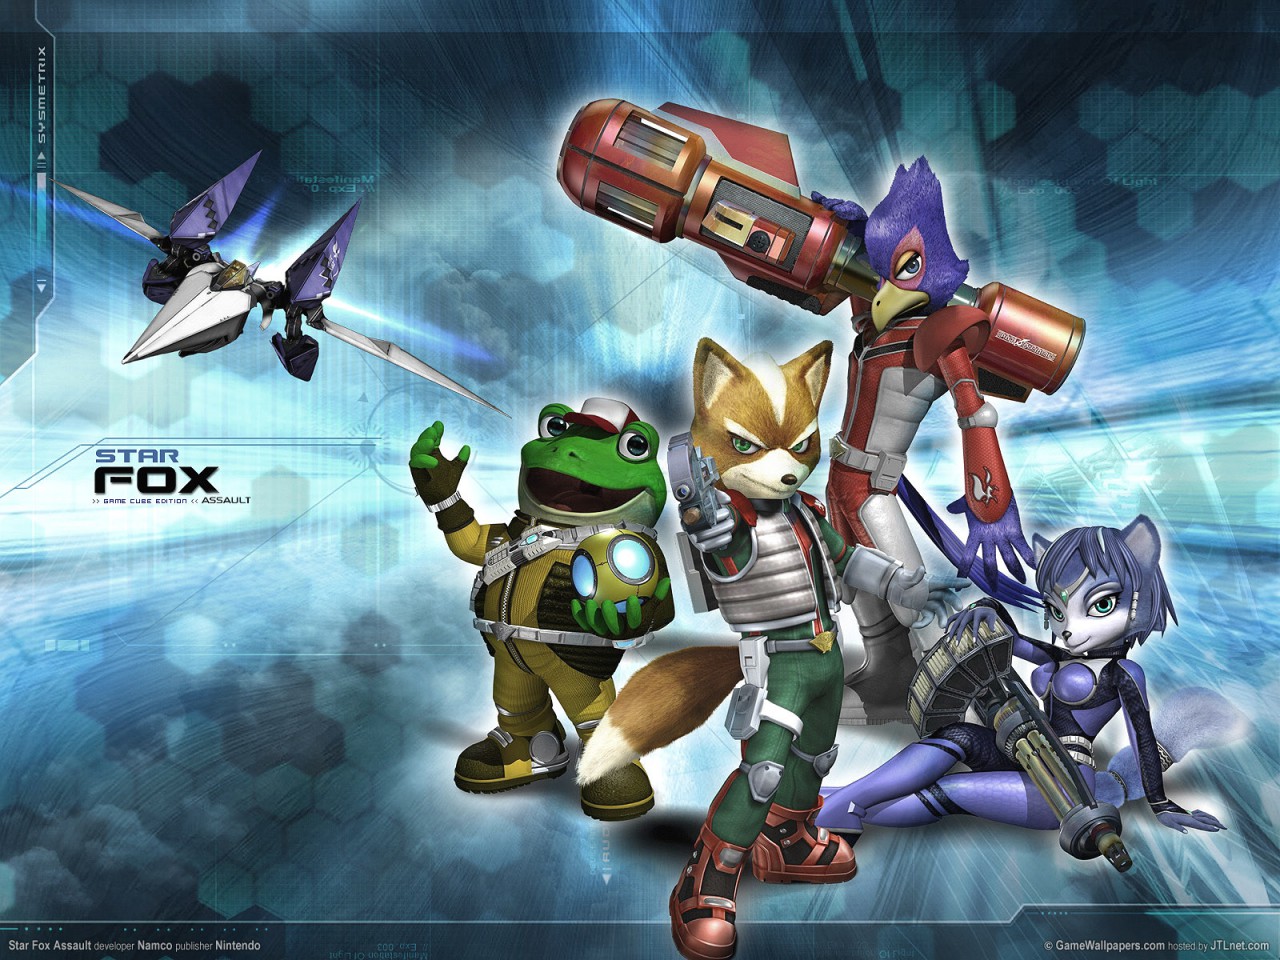 Star Fox Wii U Will be Playable at This Year's E3